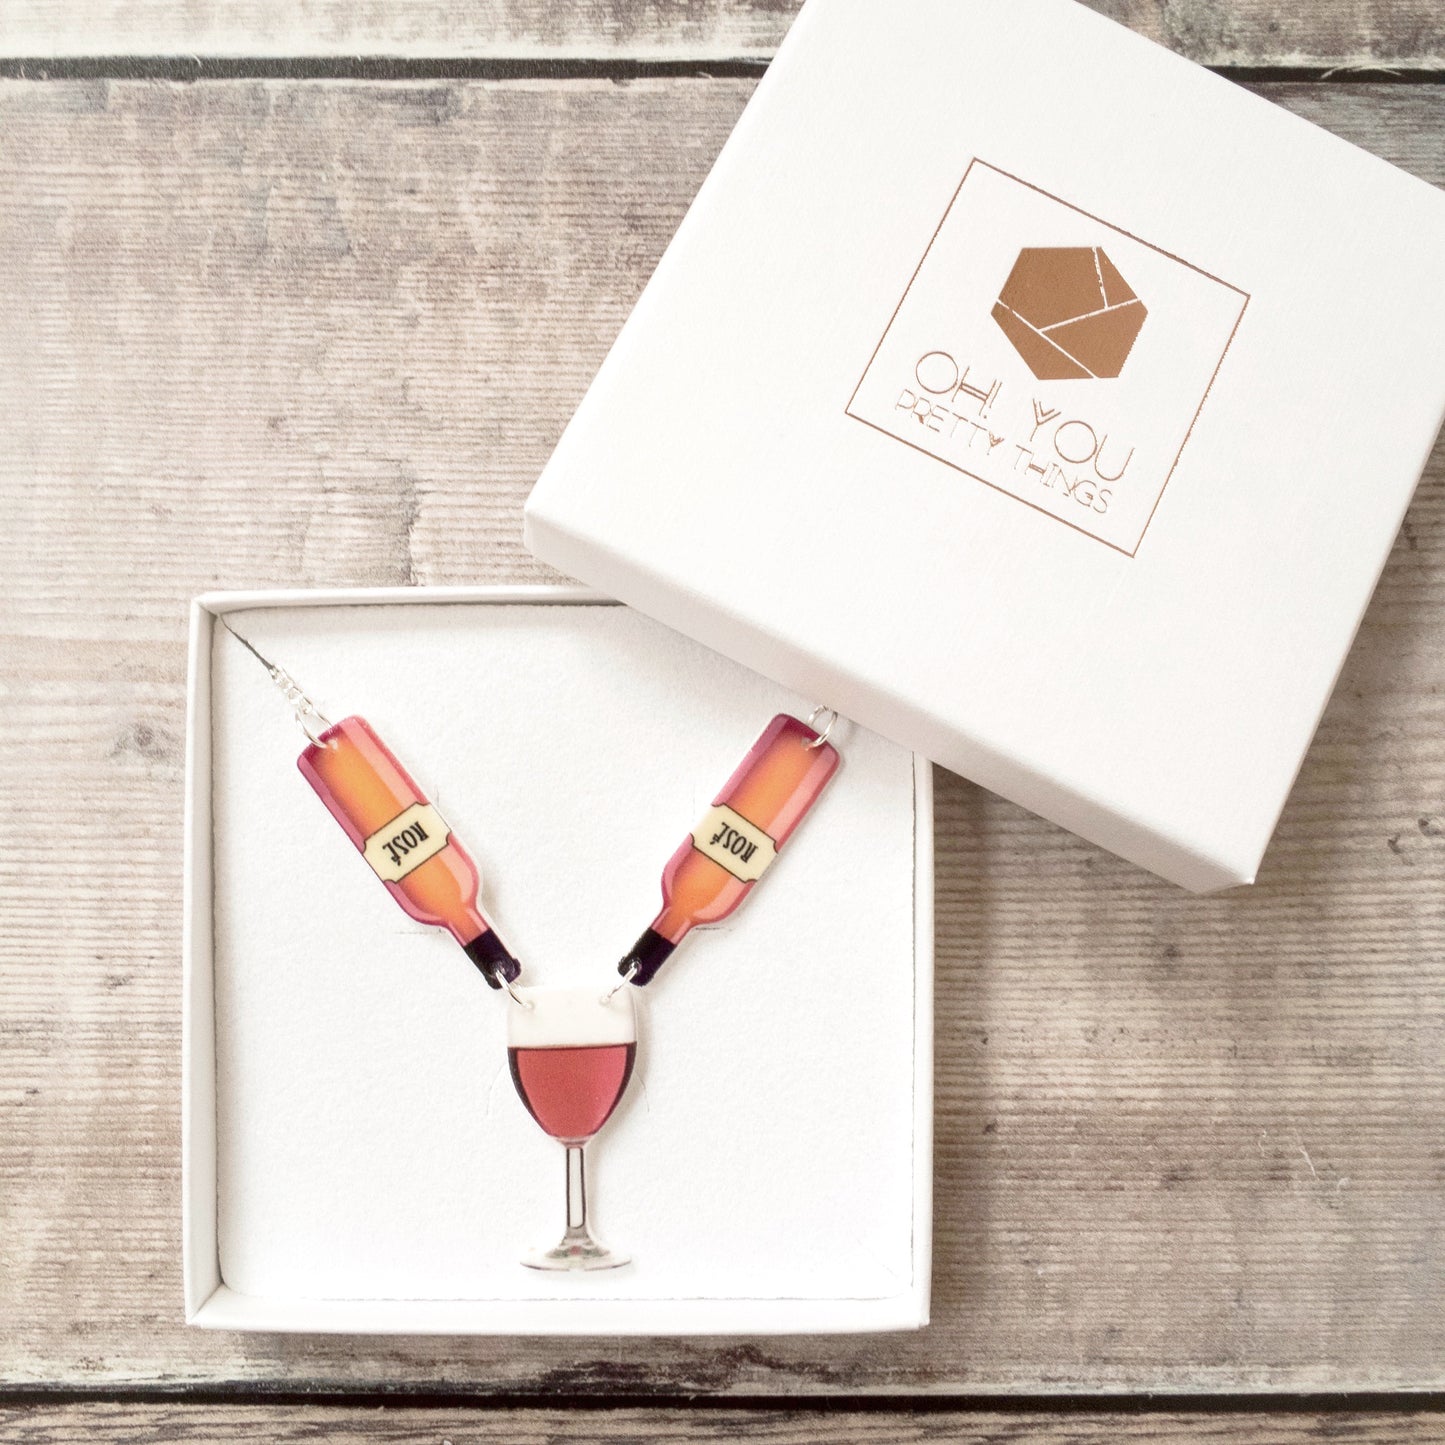 Rose wine necklace - Wine lover jewellery gift